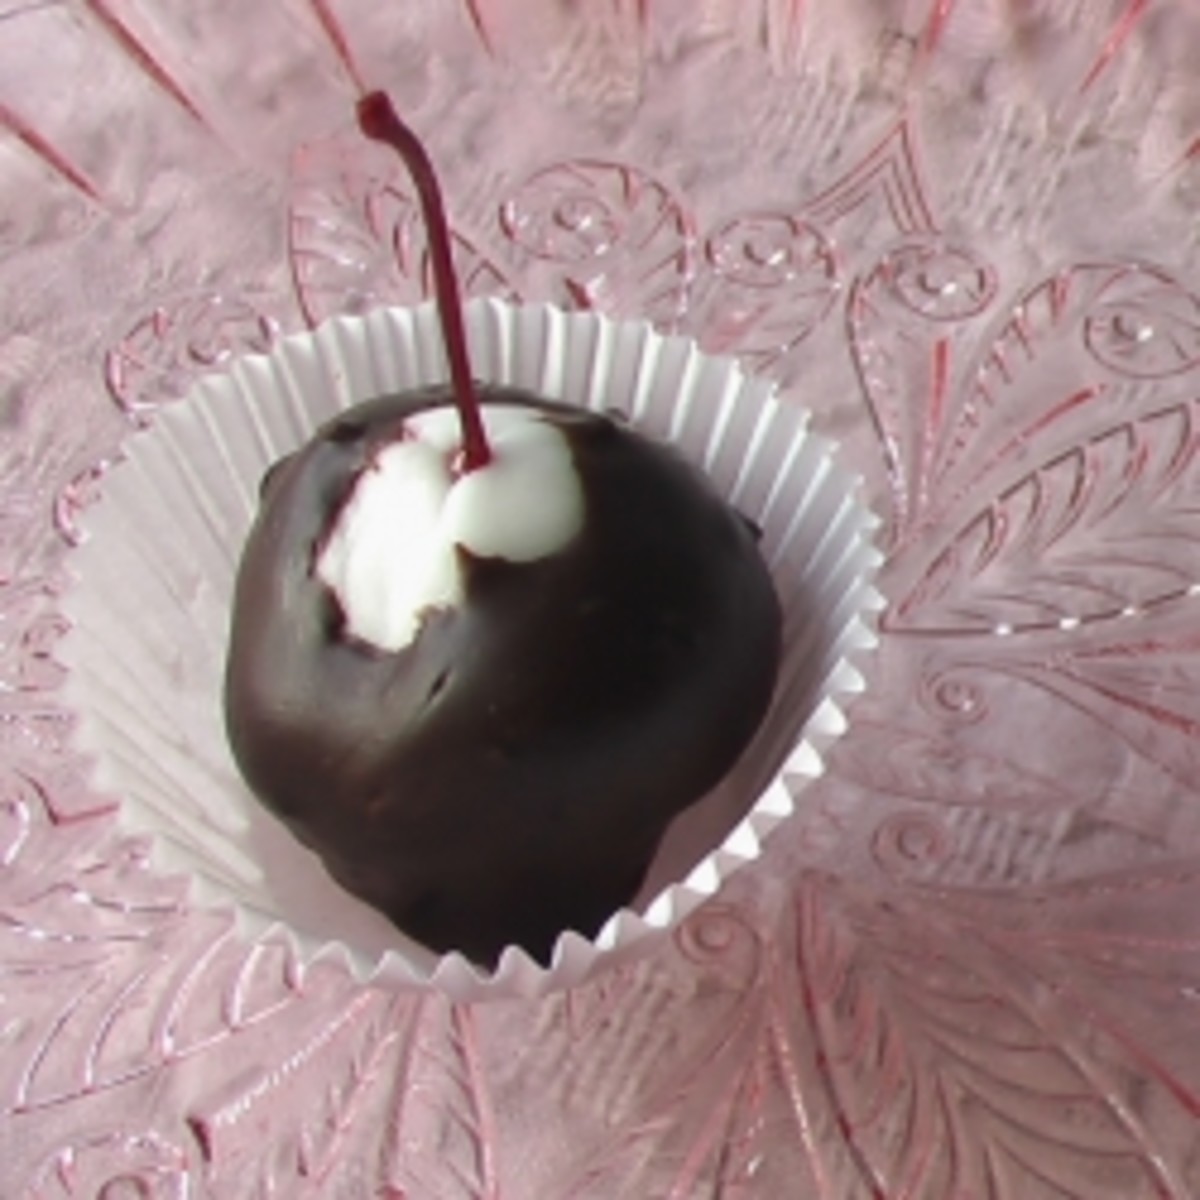 Love these Chocolate Covered Cherries!